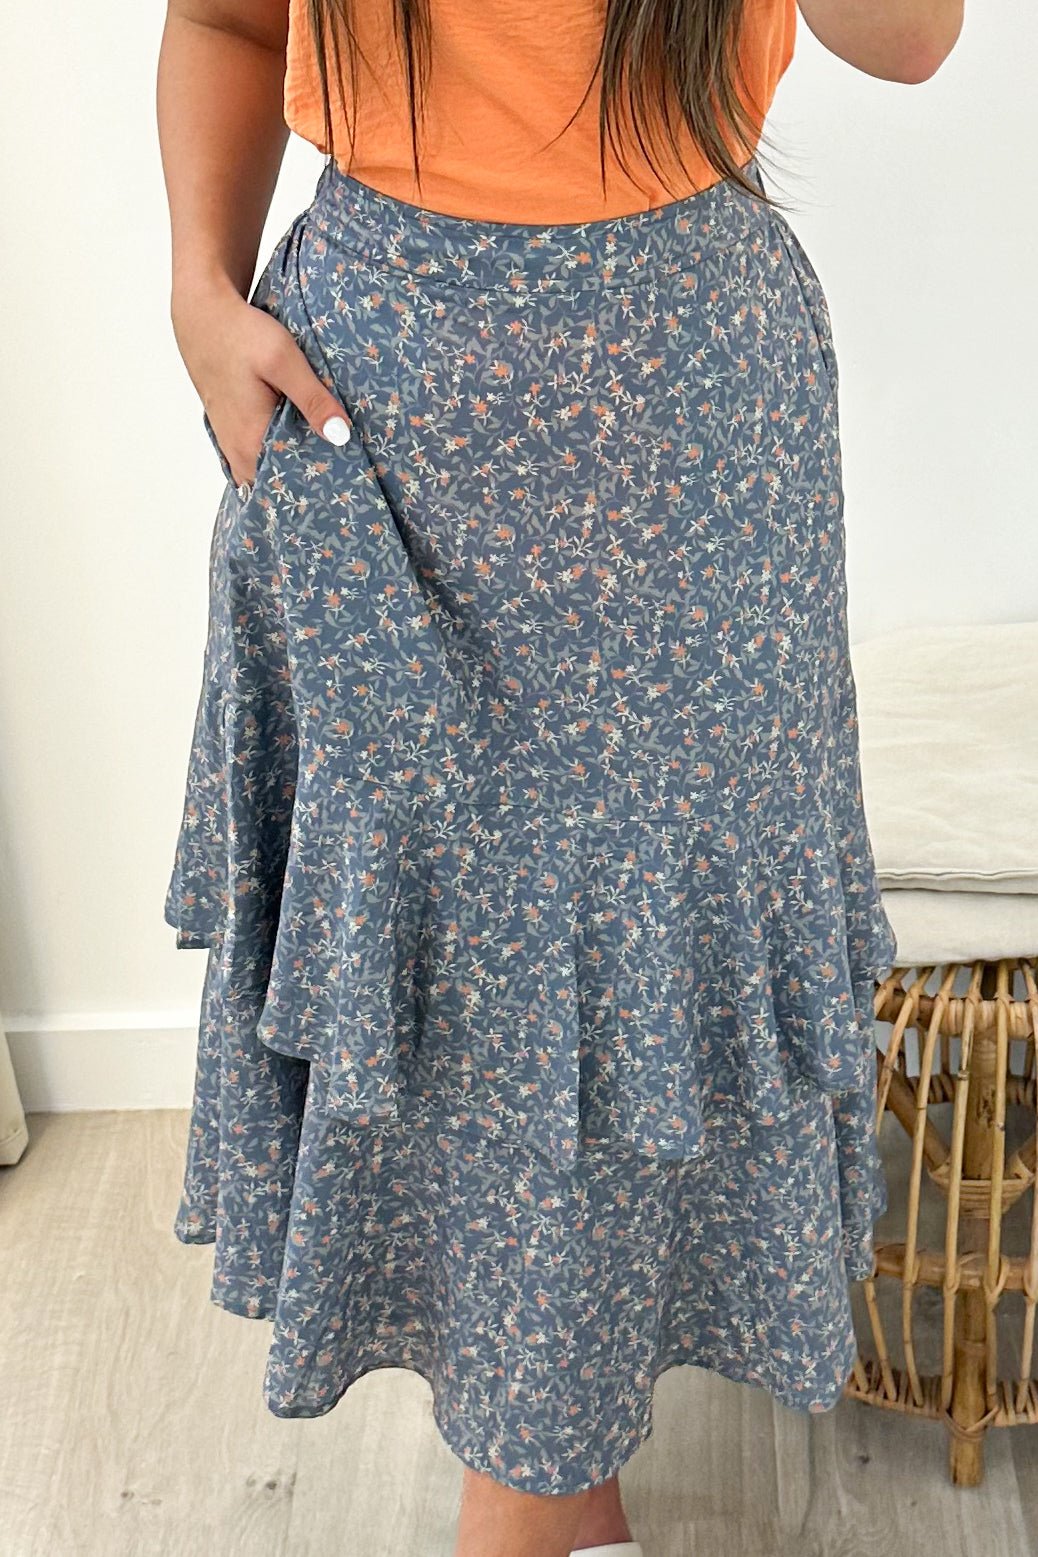 "Shower of Kindness" Midi Skirt - Happily Ever Aften